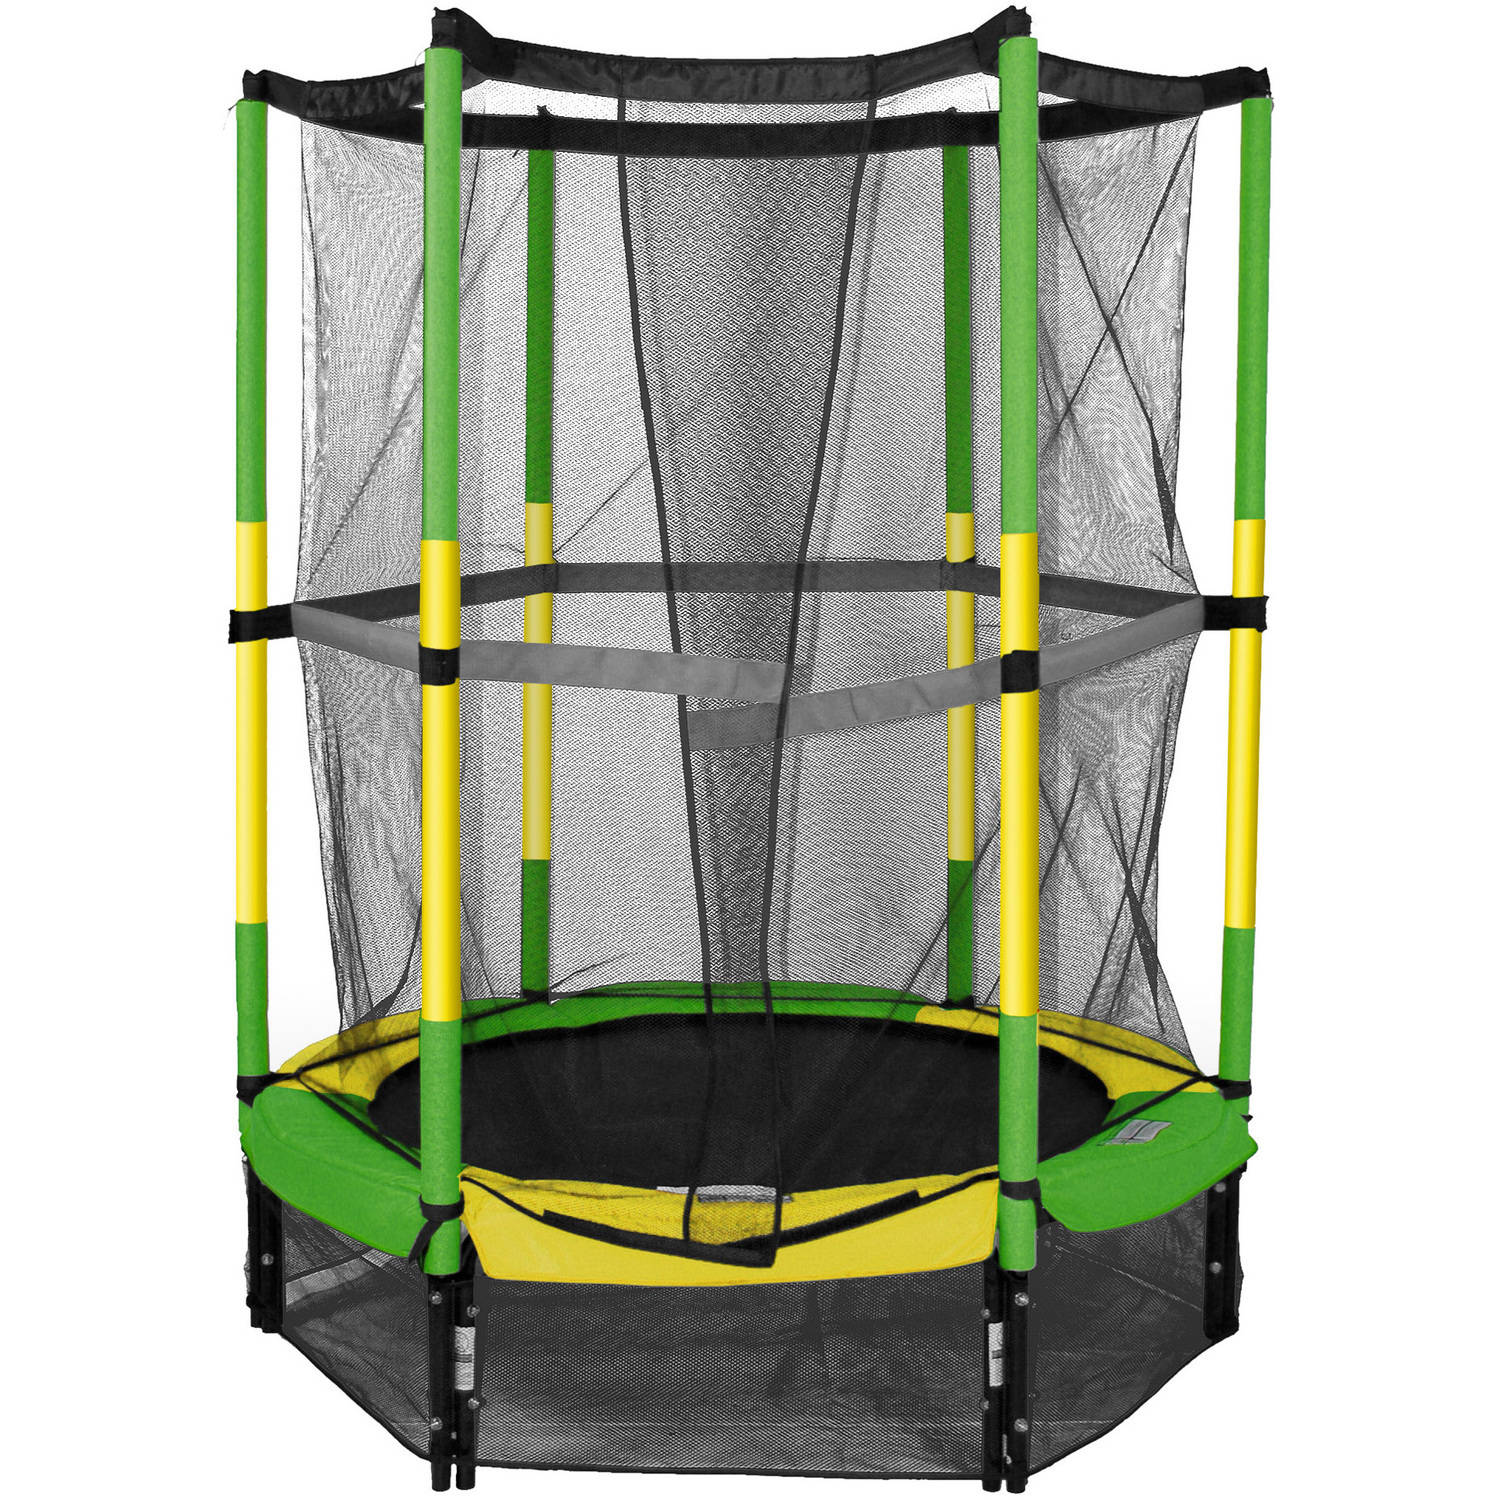 Bounce Pro 55-Inch My First Trampoline, with Safety Enclosure, Green - image 1 of 4